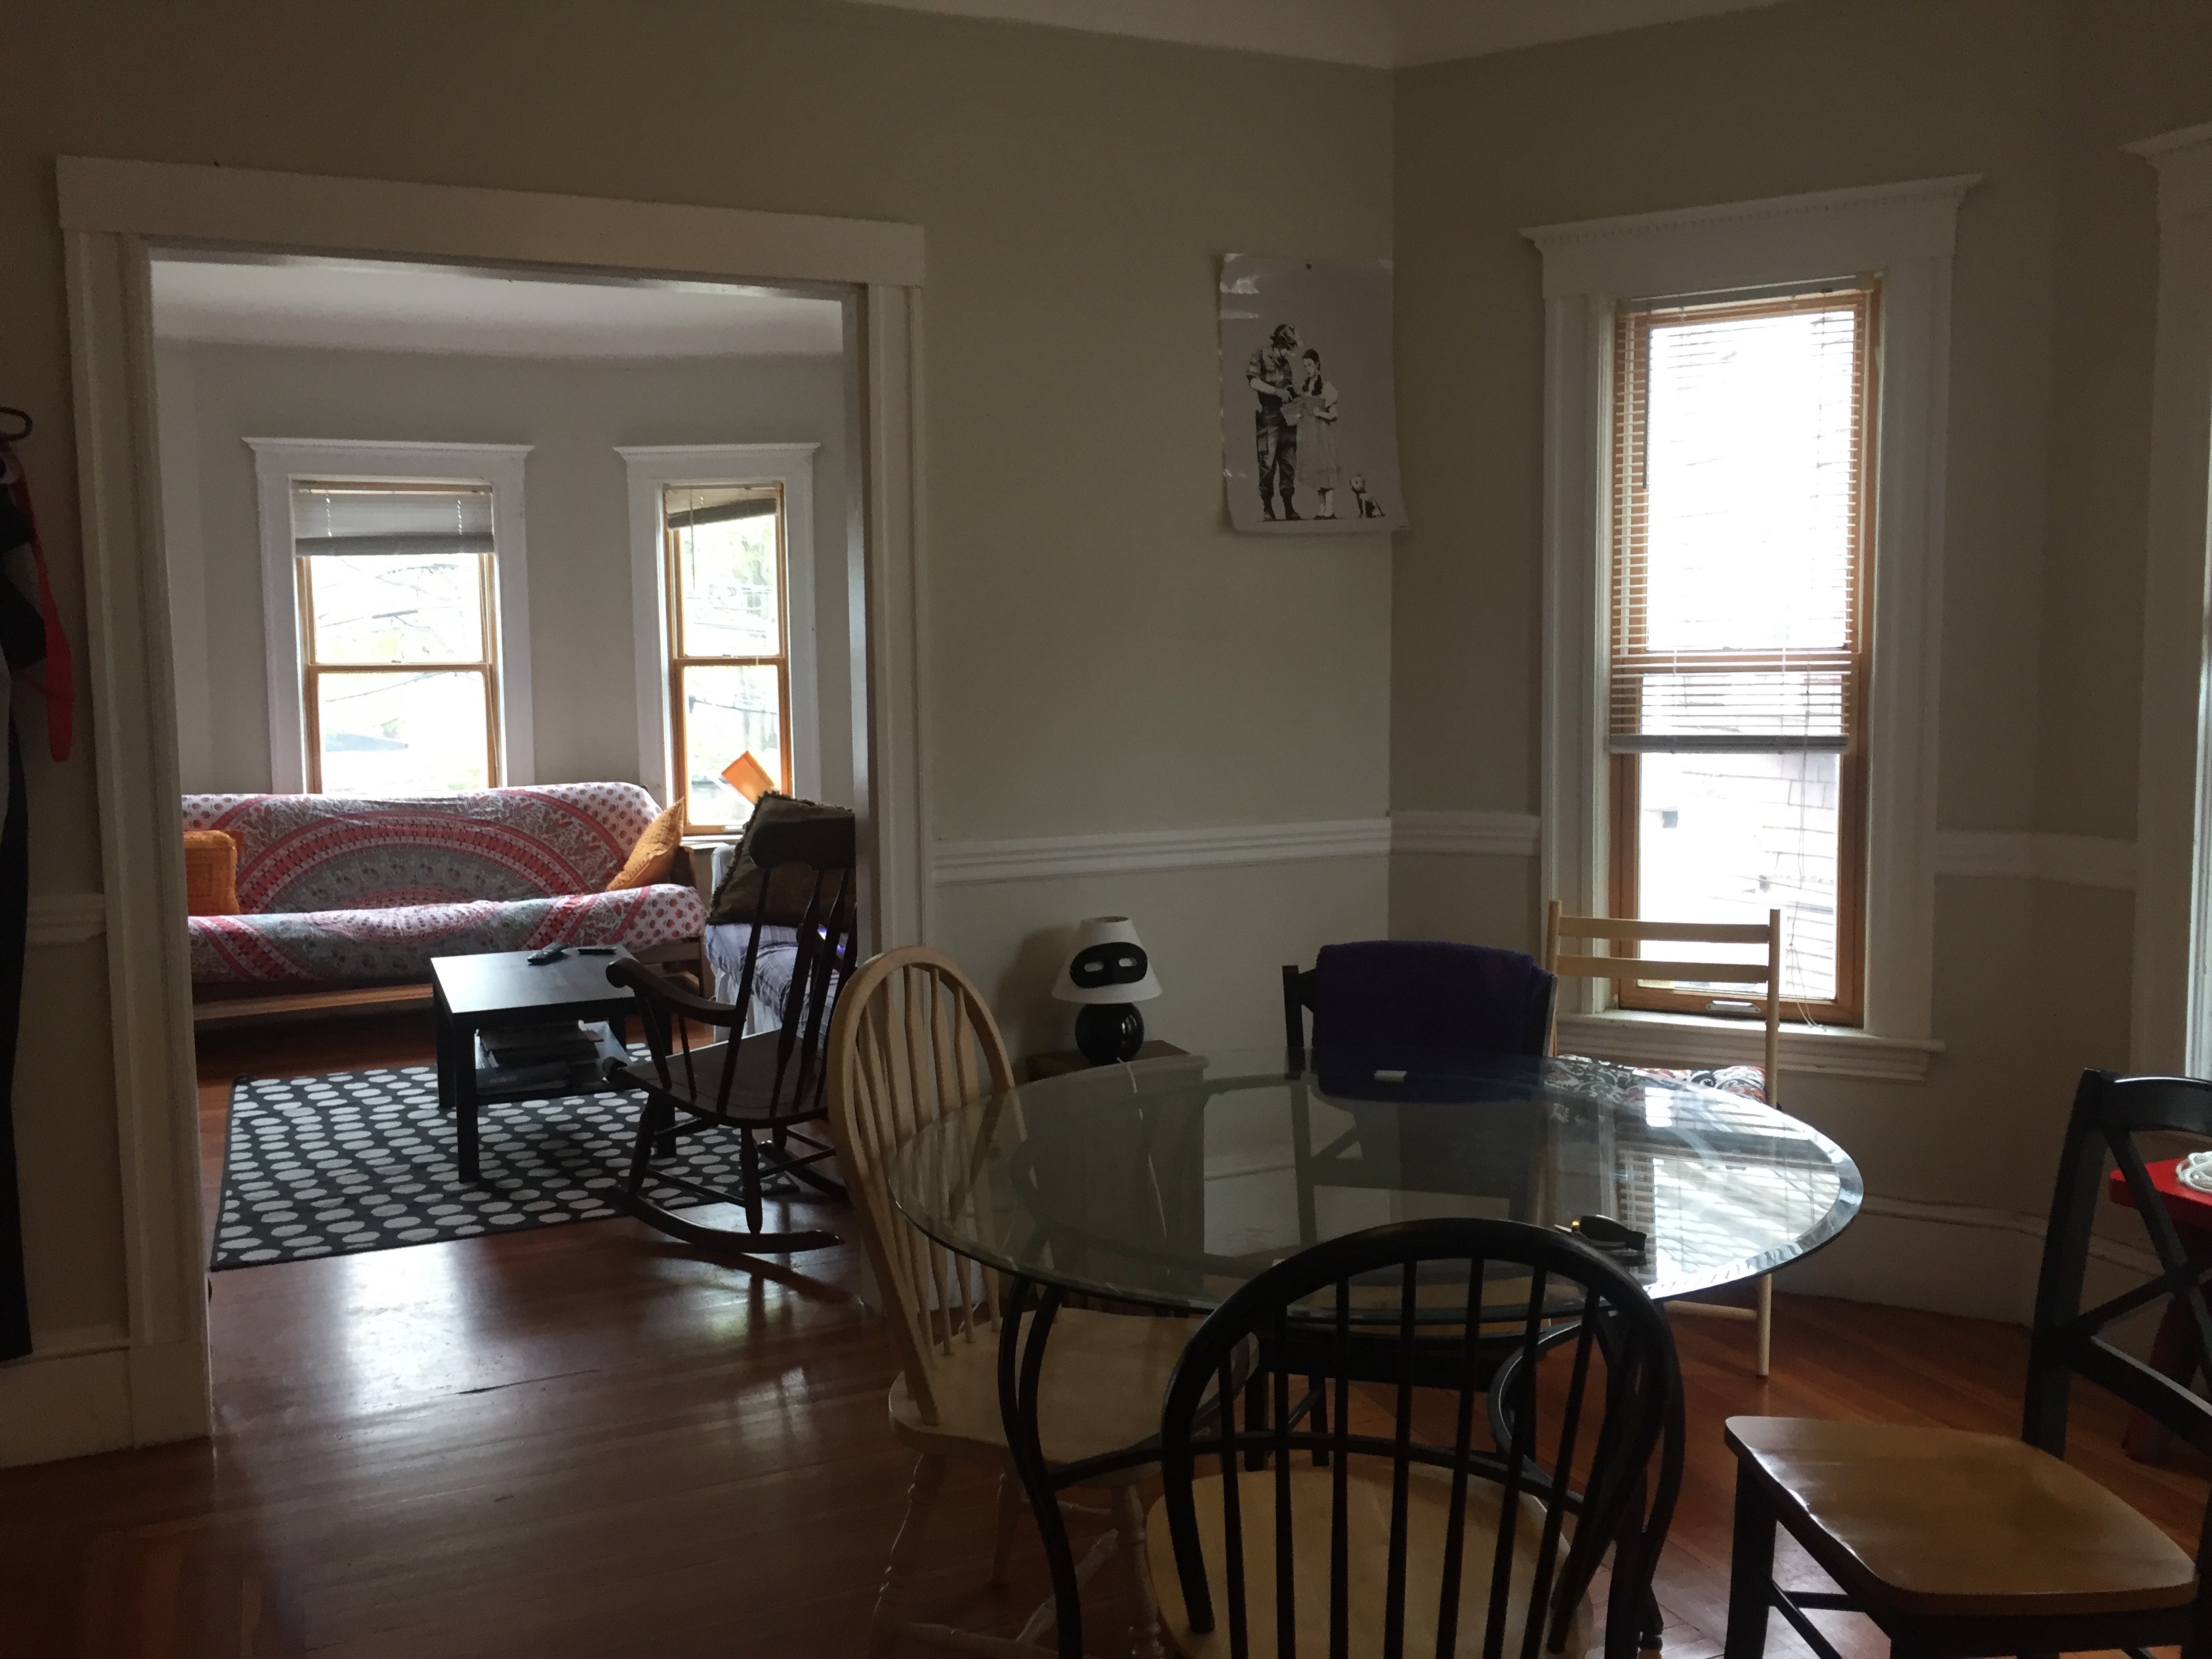 Photos of apartment on Lowden Ave.,Somerville MA 02144